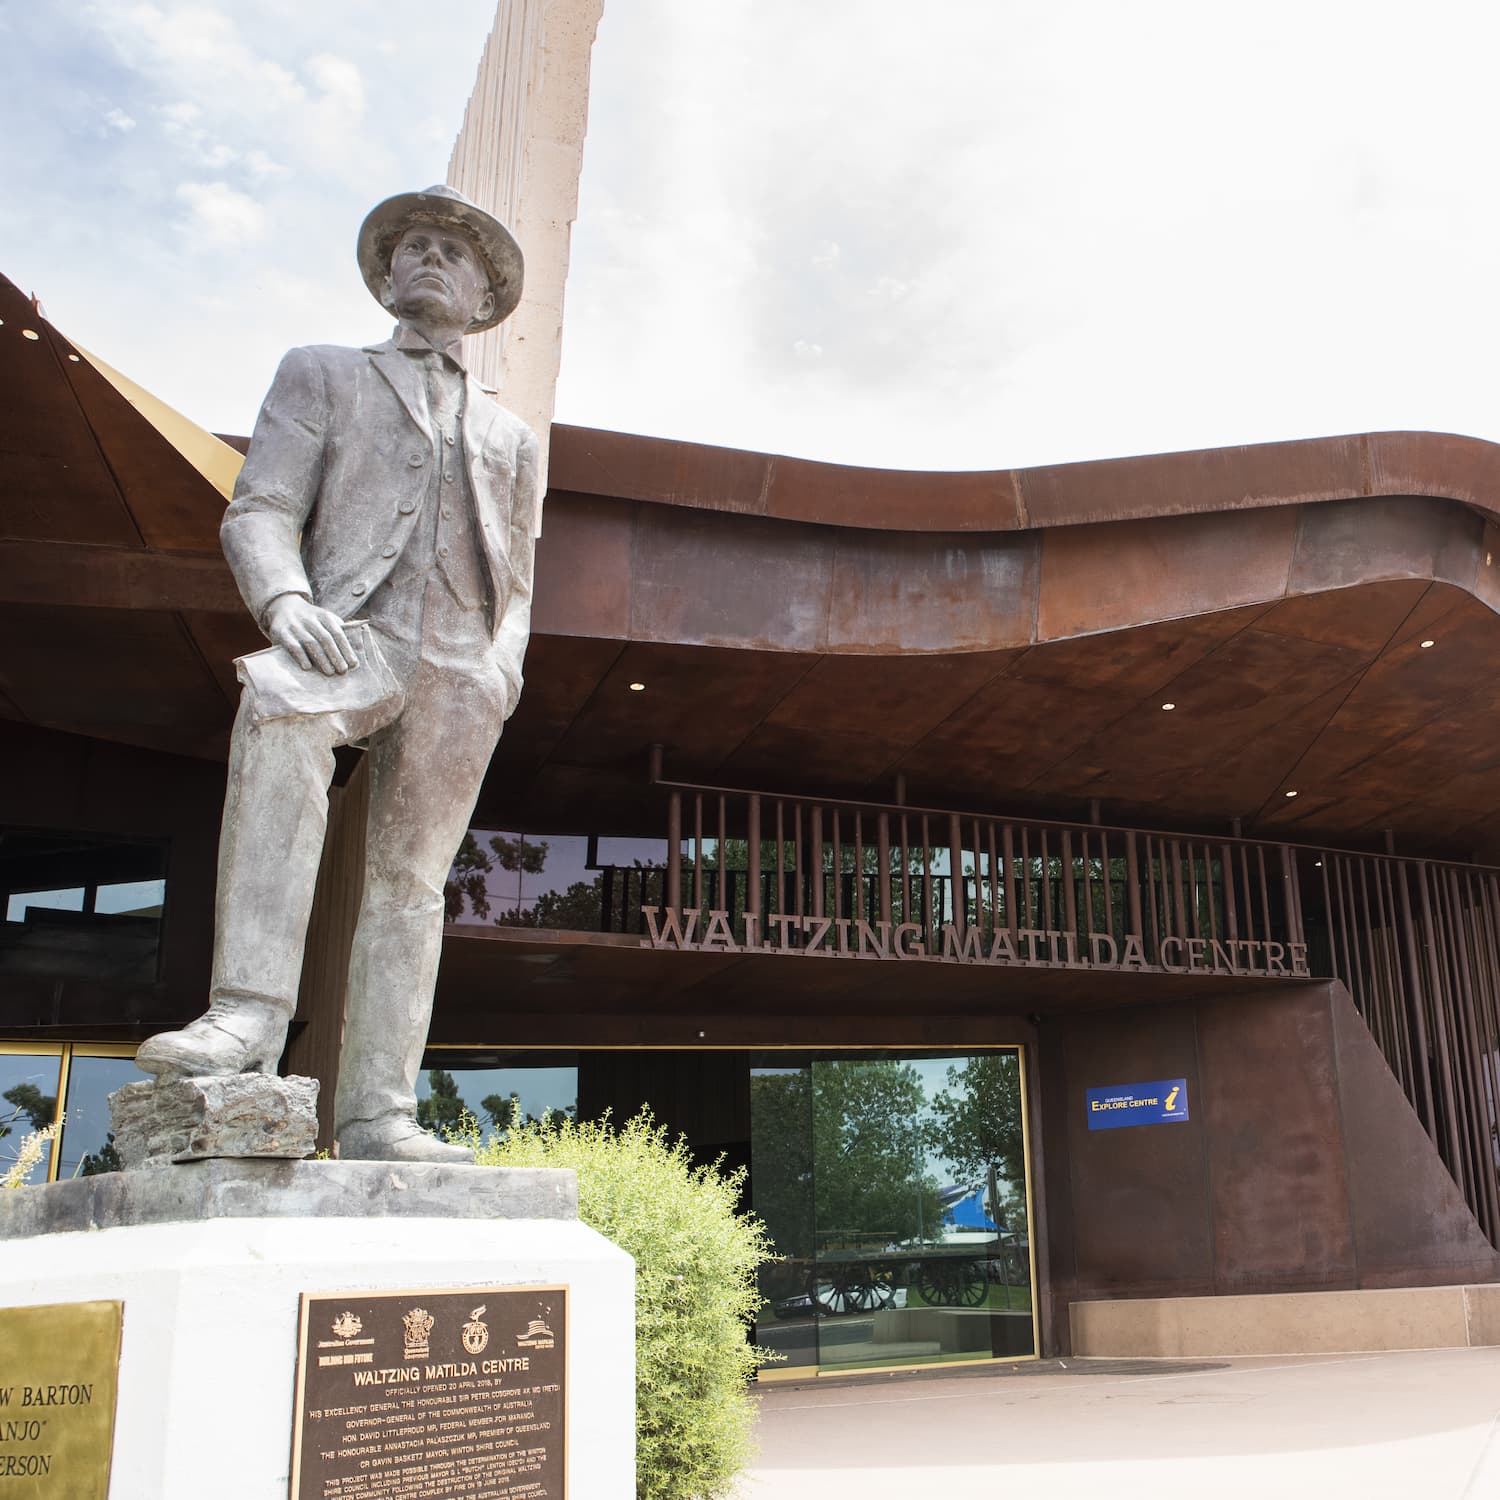 Entry to the Waltzing Matilda Centre, Winton with a statue of Banjo Paterson in the foreground